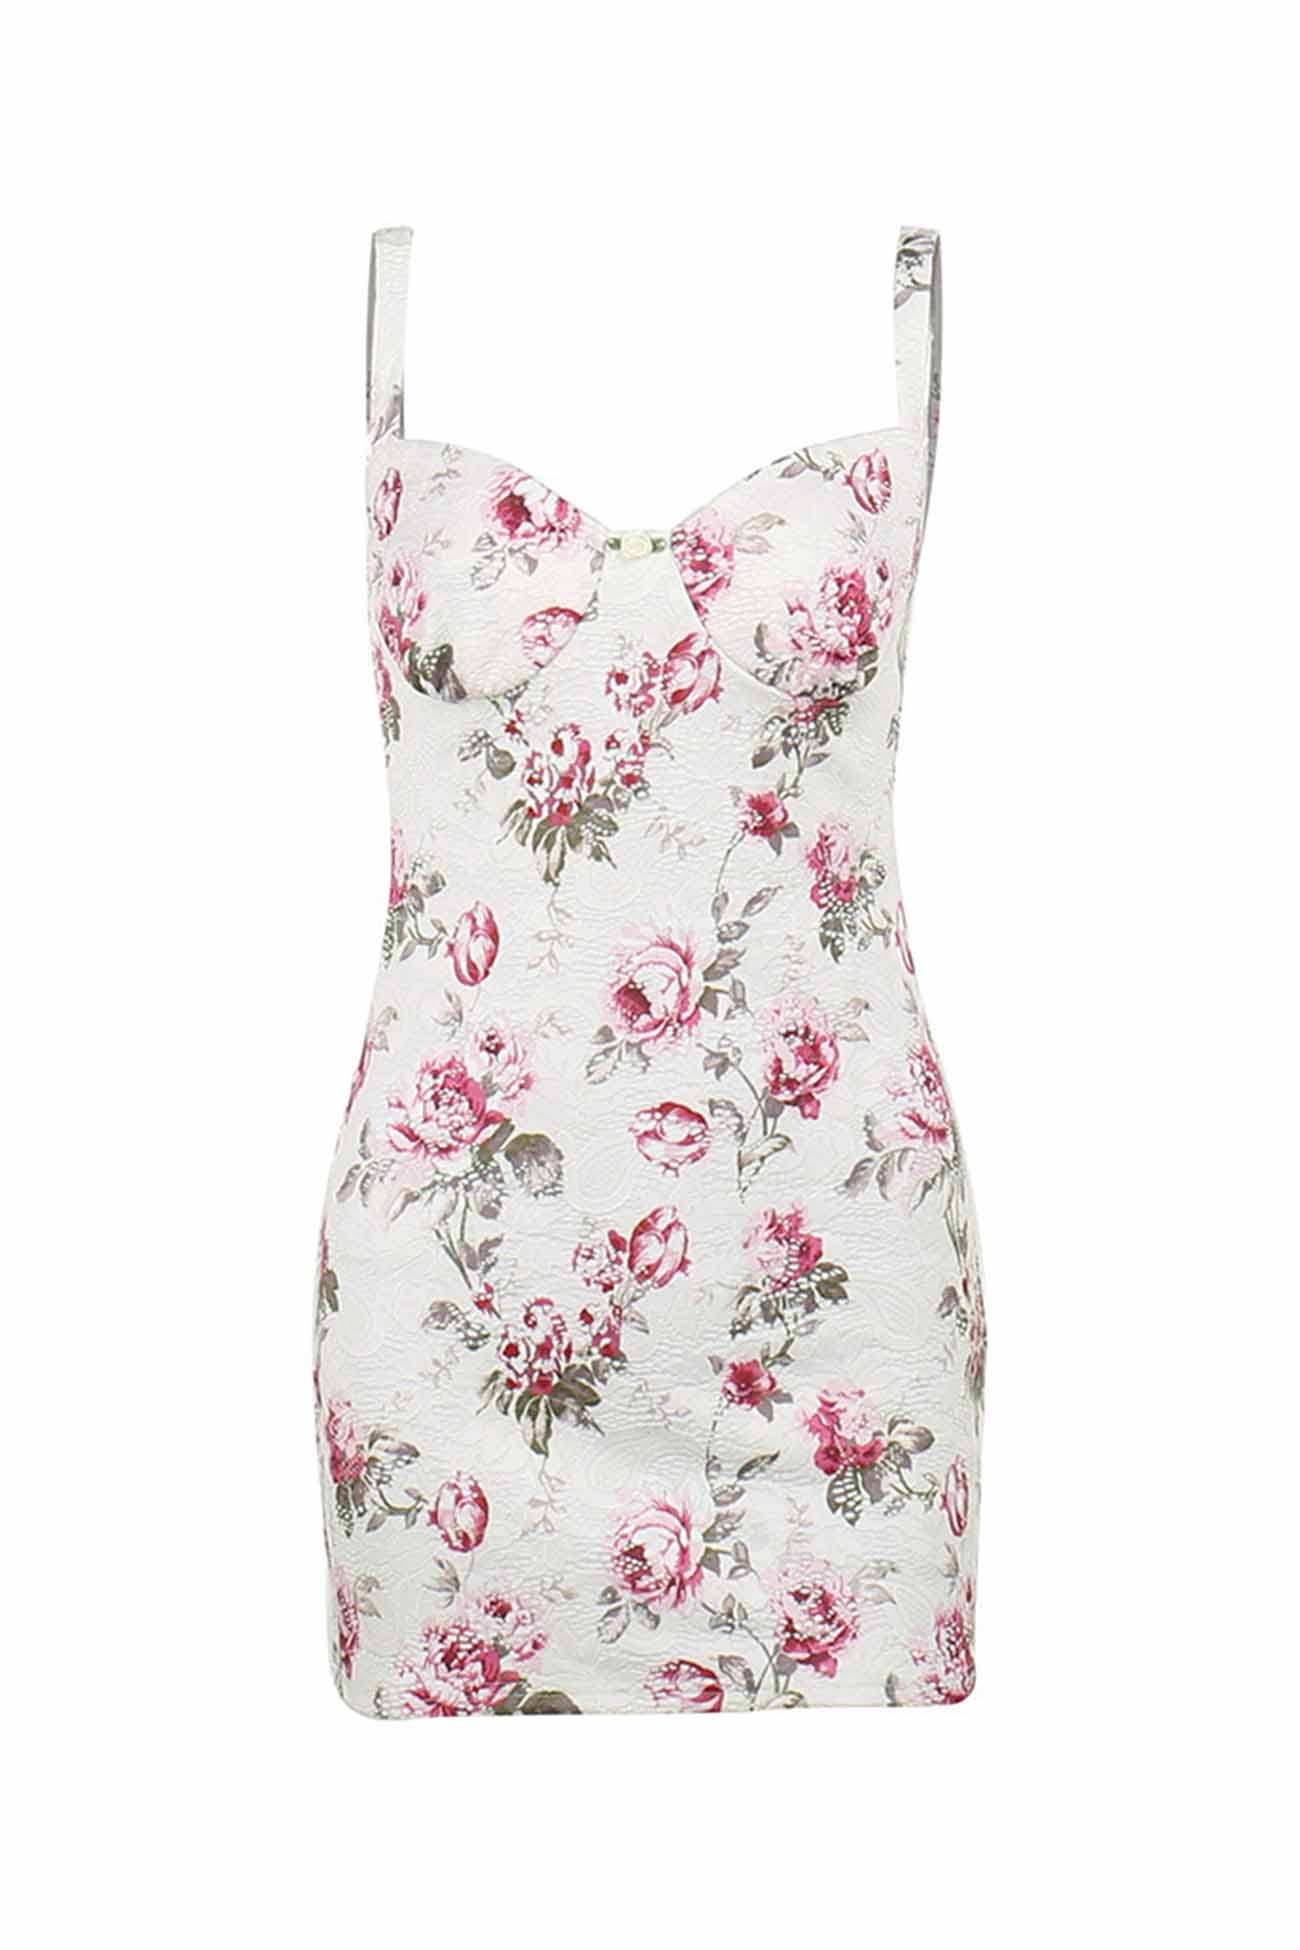 Lace Floral Printed Bodycon Cami Dress